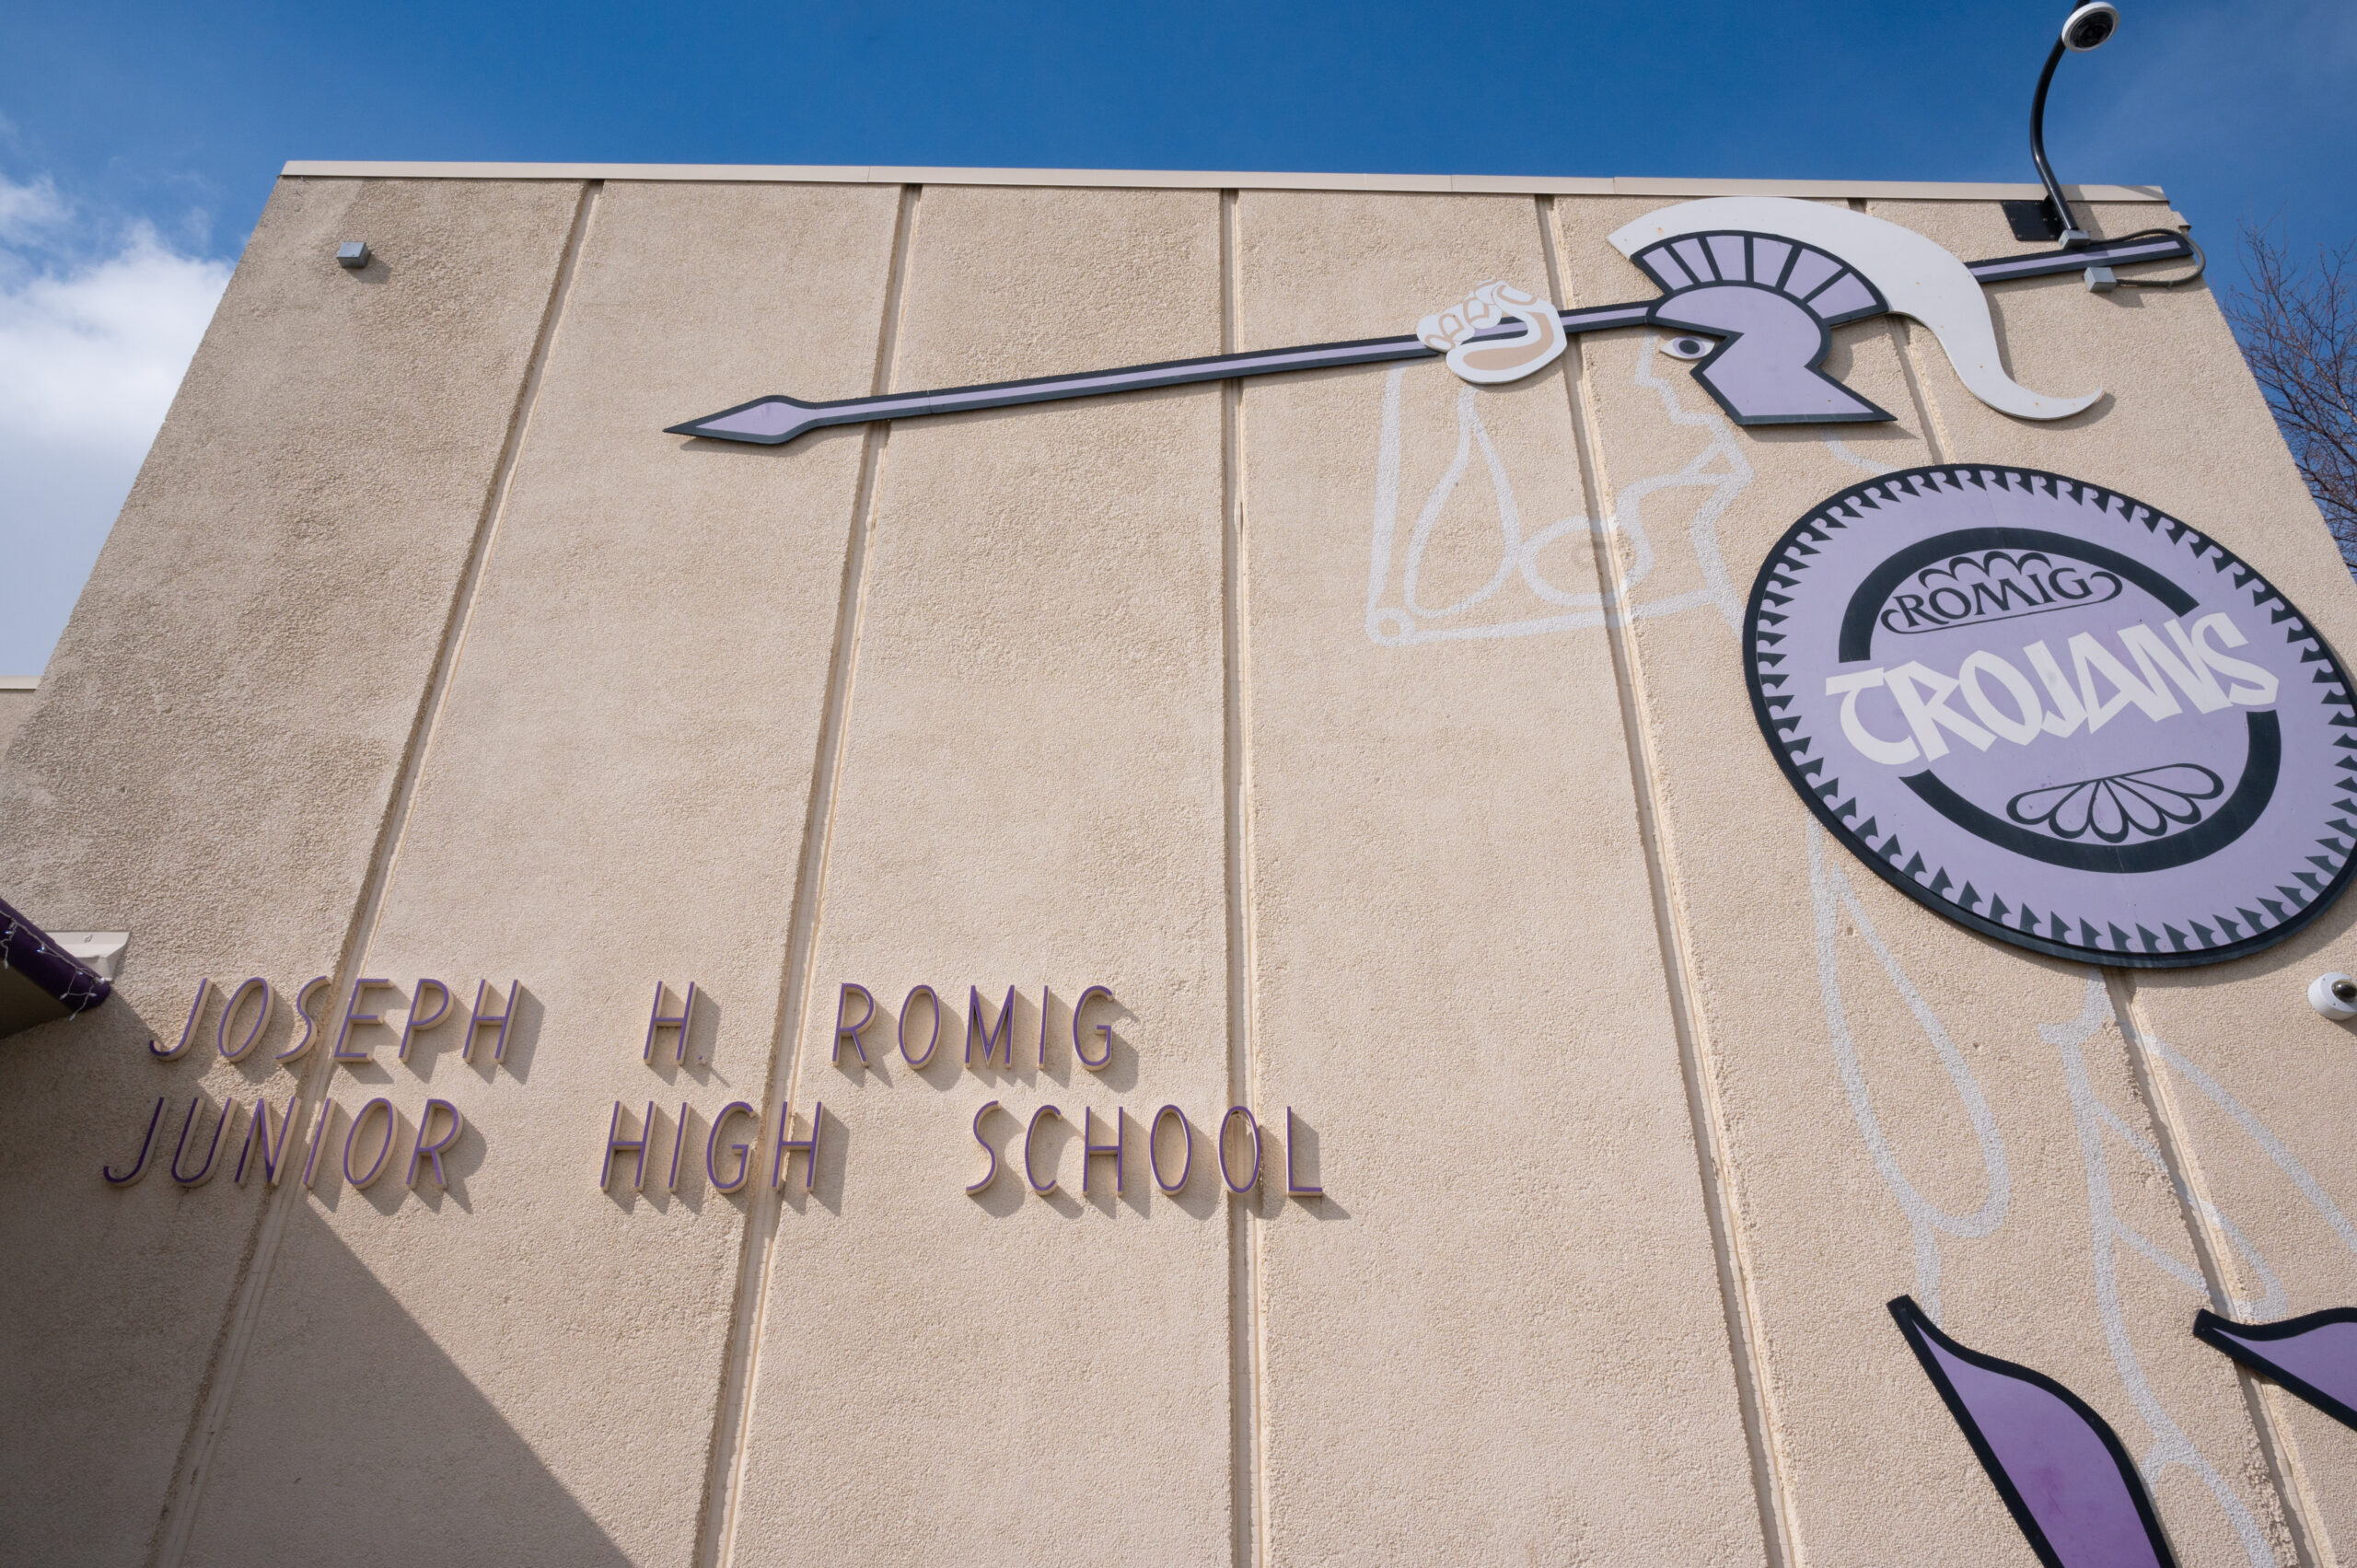 the outside of Romig Middle School